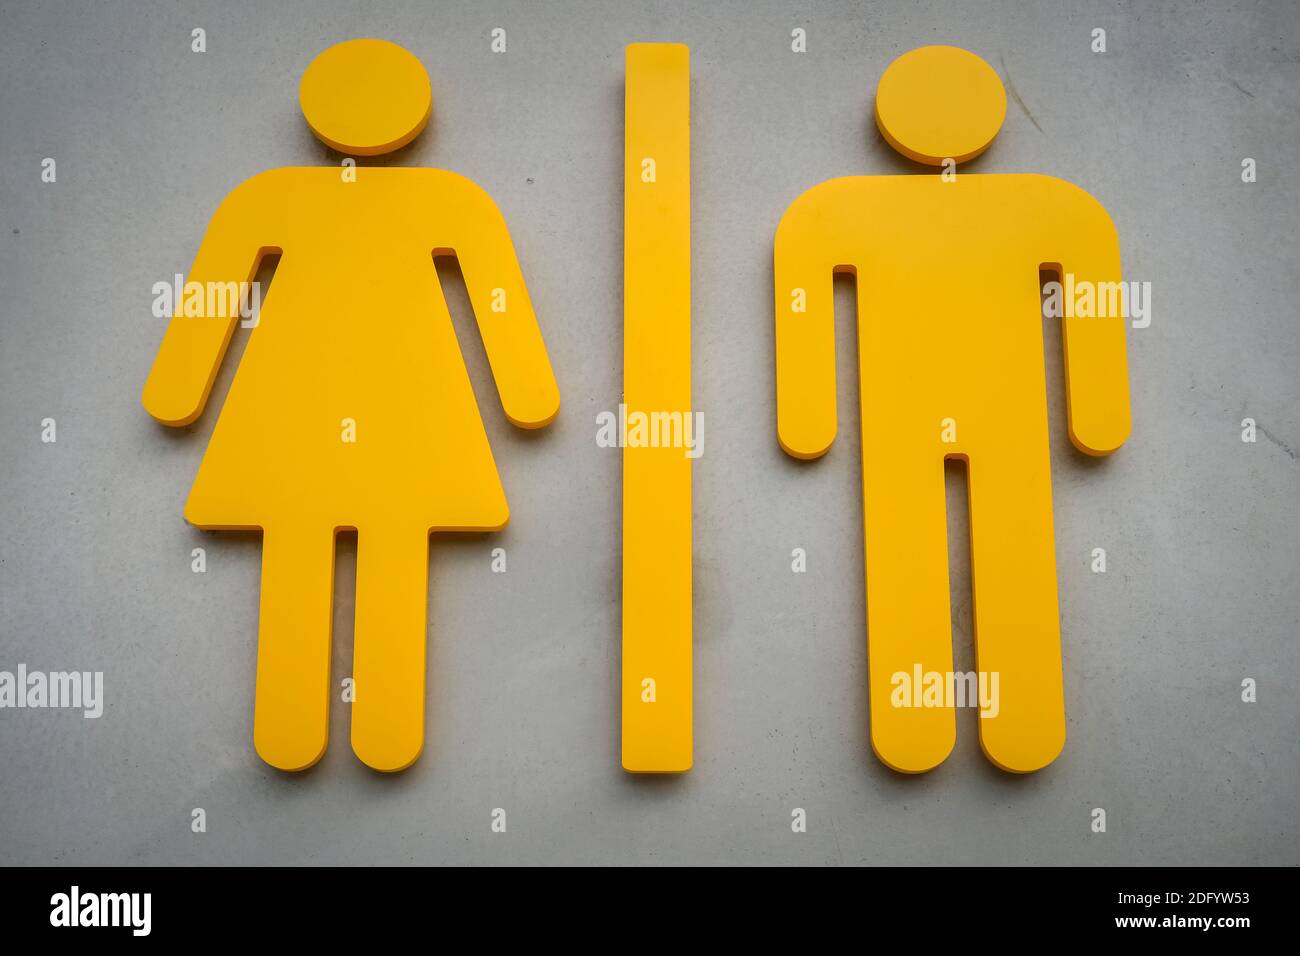 Yellow side by side woman and man symbols of public toilet restroom sign on a concrete wall Stock Photo